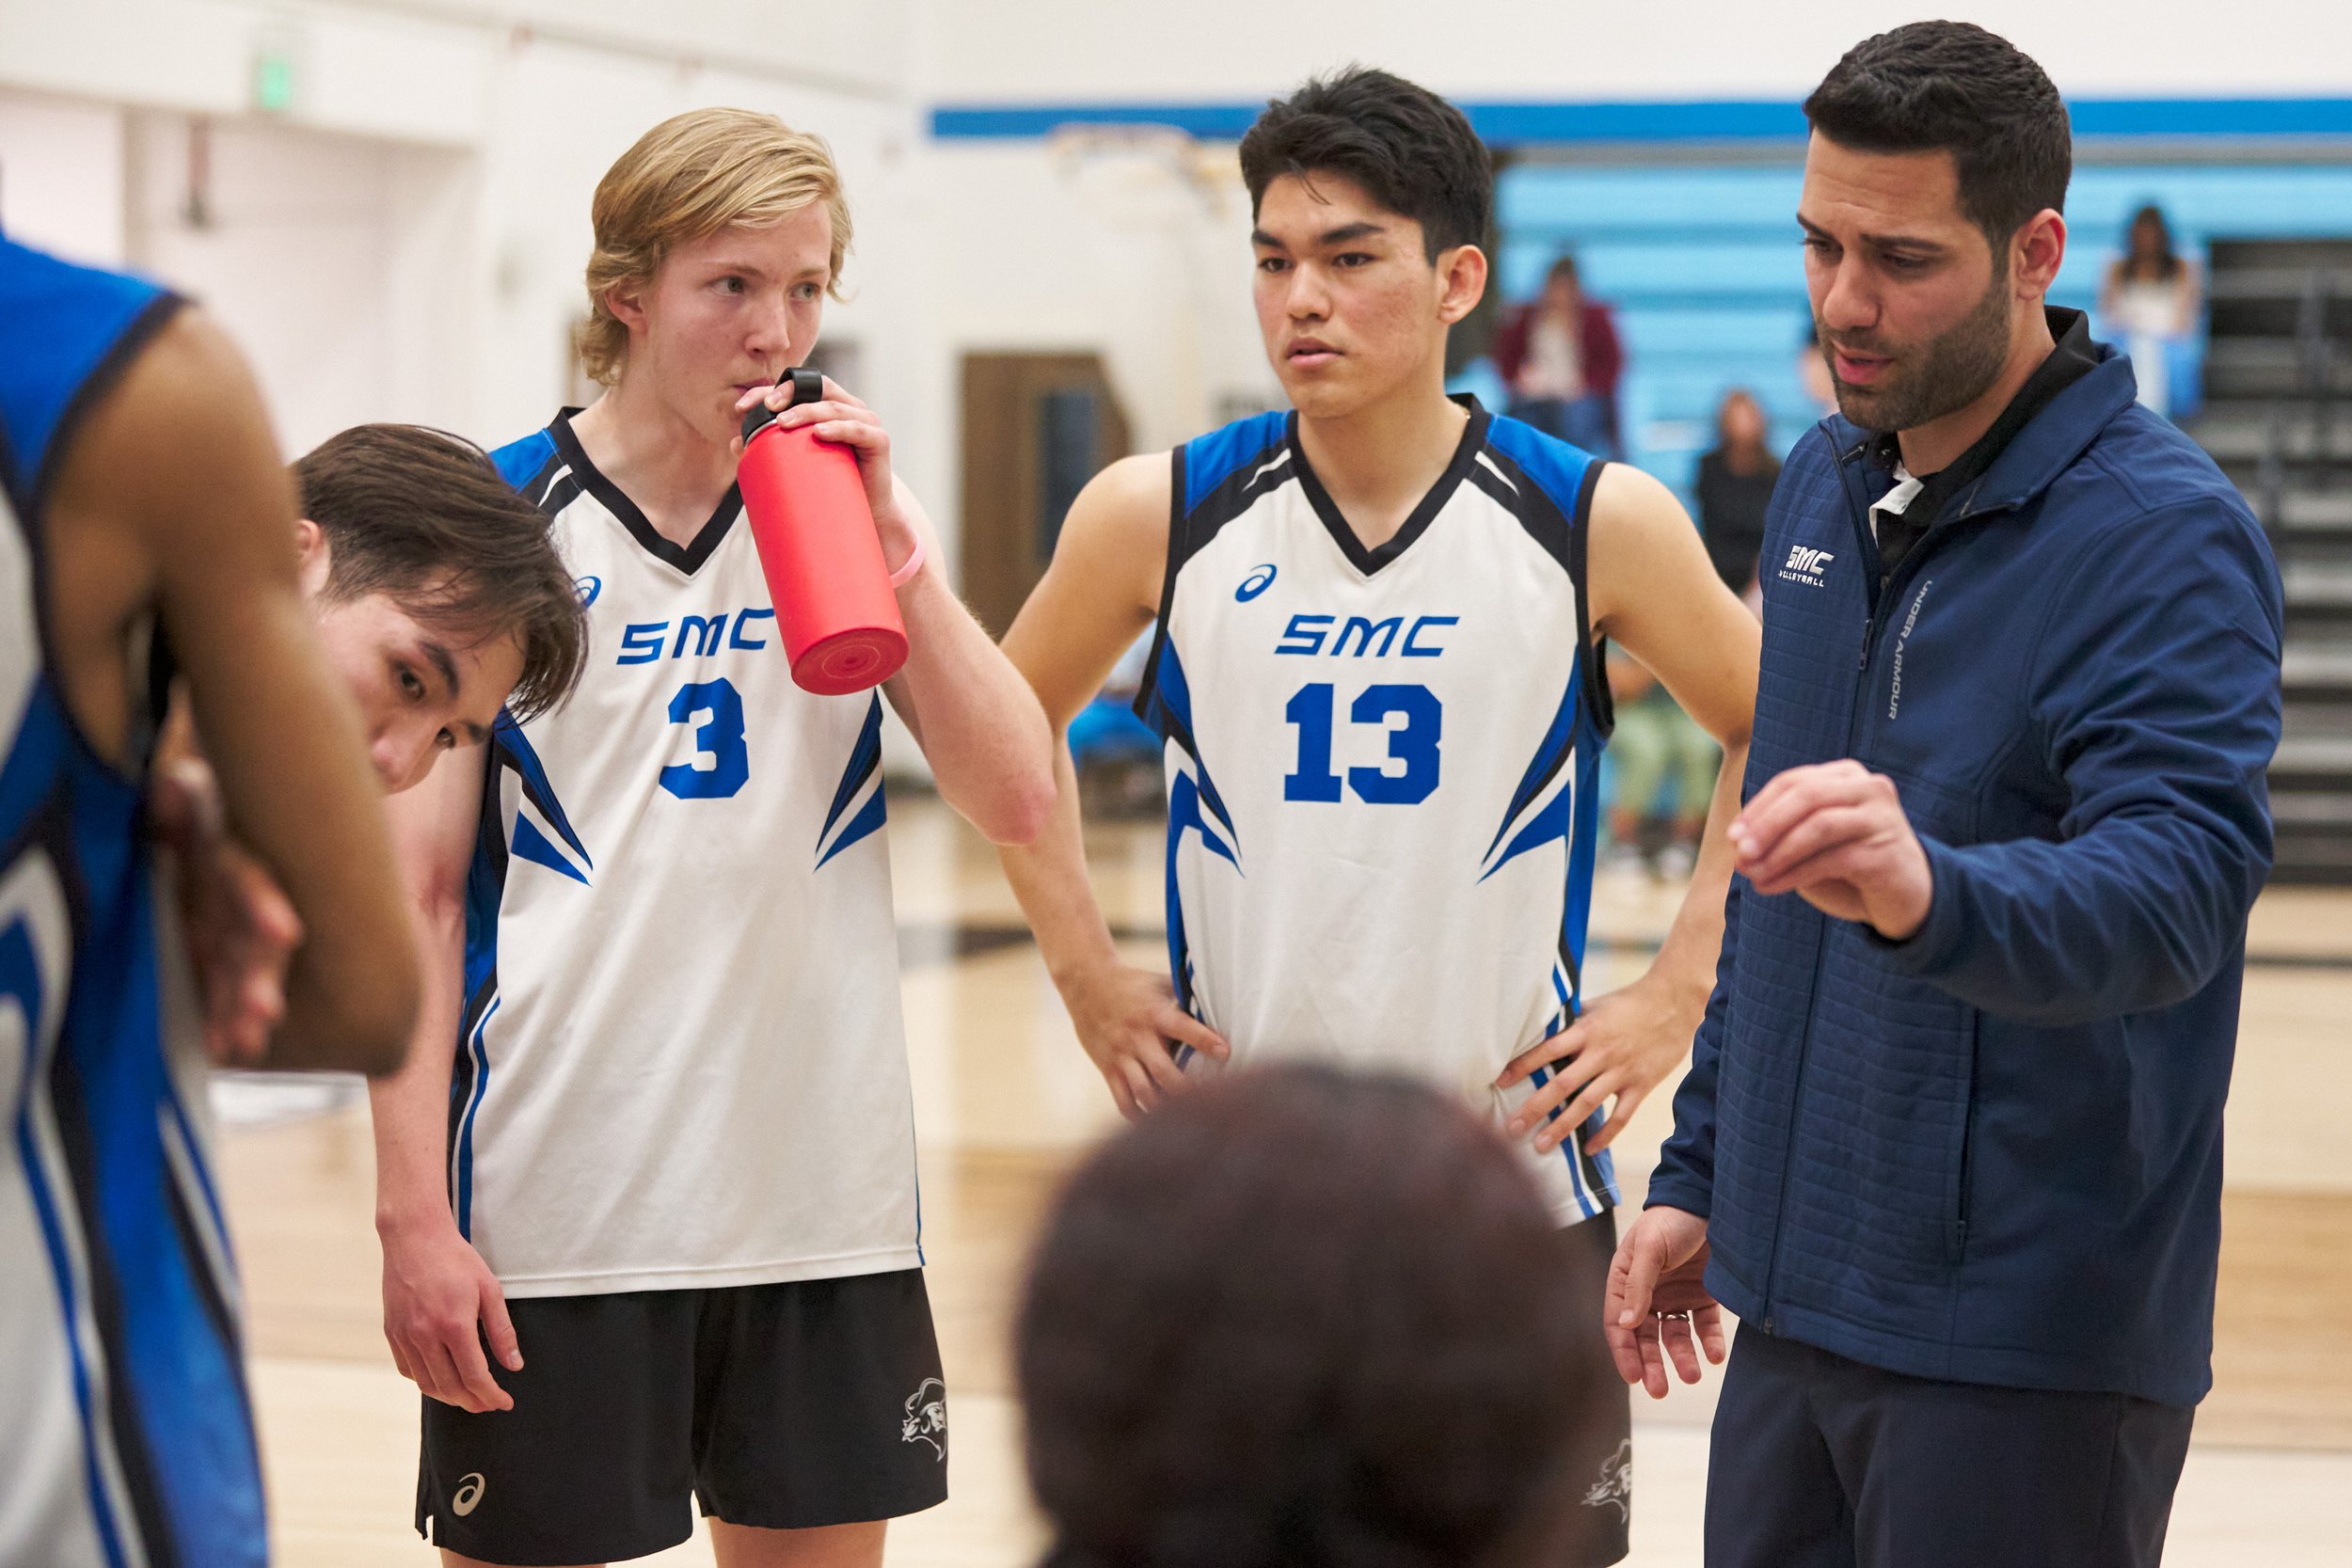  Santa Monica College Corsairs Men's Volleyball Head Coach Liran Zamir (right), Lester Ortiz (center),  Camden Higbee (left), and Enkhtur Tserendavaa (far left) during the men's volleyball match against the Moorpark College Raiders on Friday, March 1